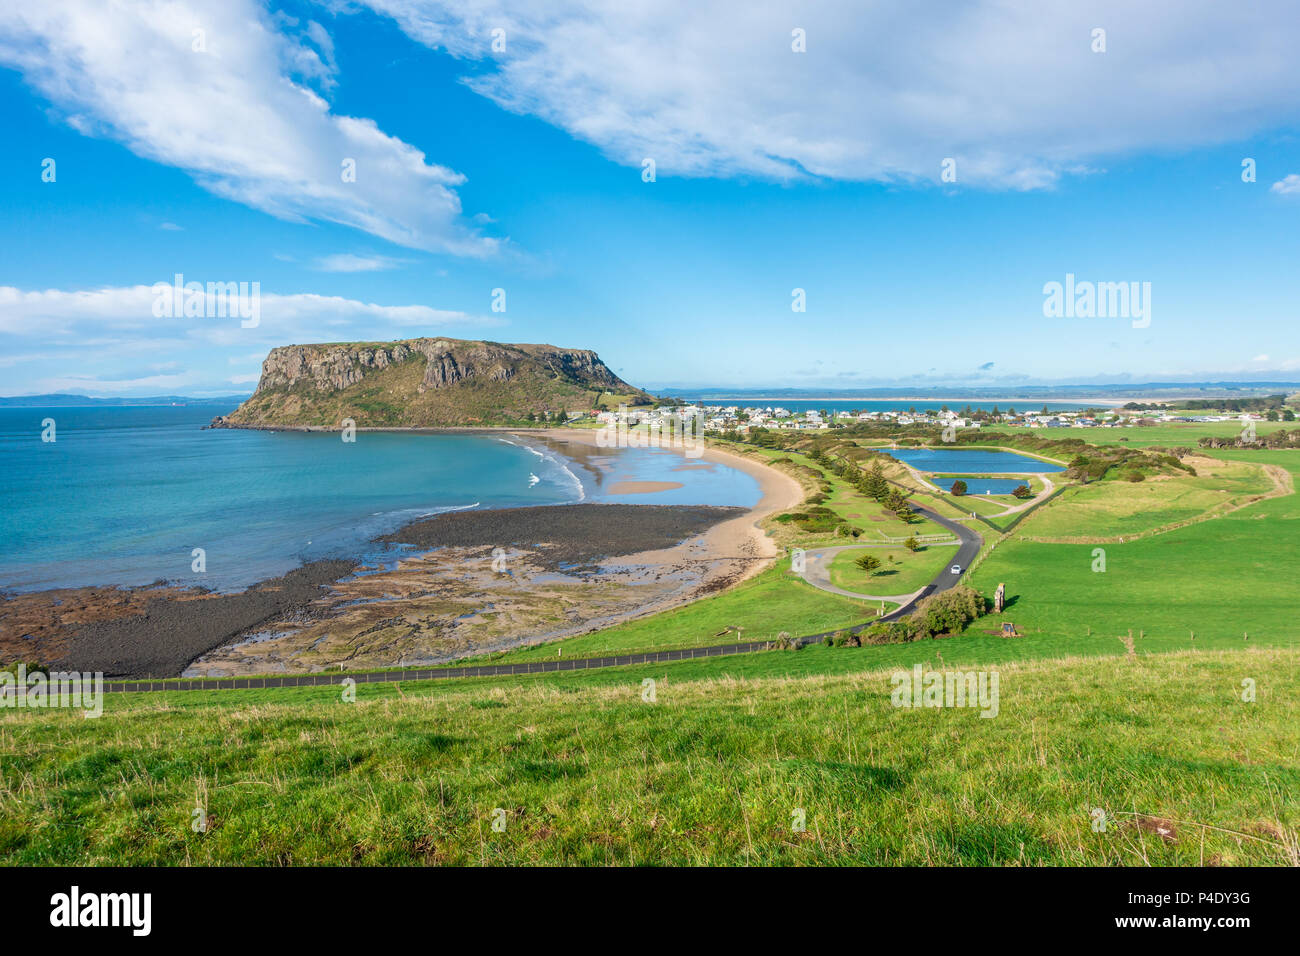 Landscape view of the nut -- remains of an ancient volcanic plug, and the historic village of Stanley. Tasmania, Australia Stock Photo